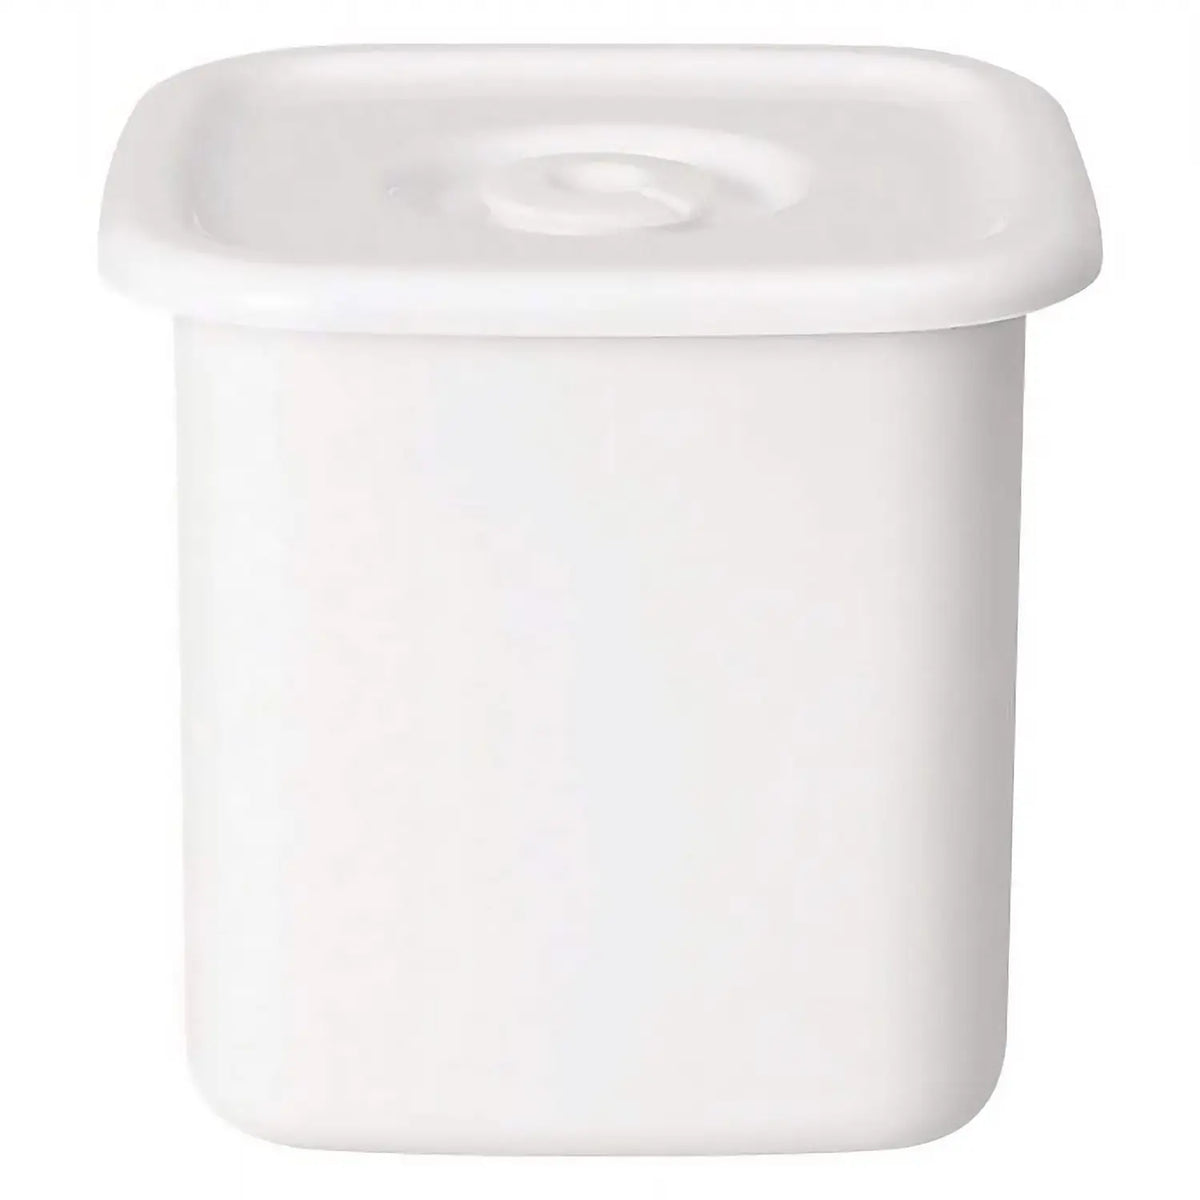 Noda Horo White Series Enamel Square Food Containers with Sealed Lid